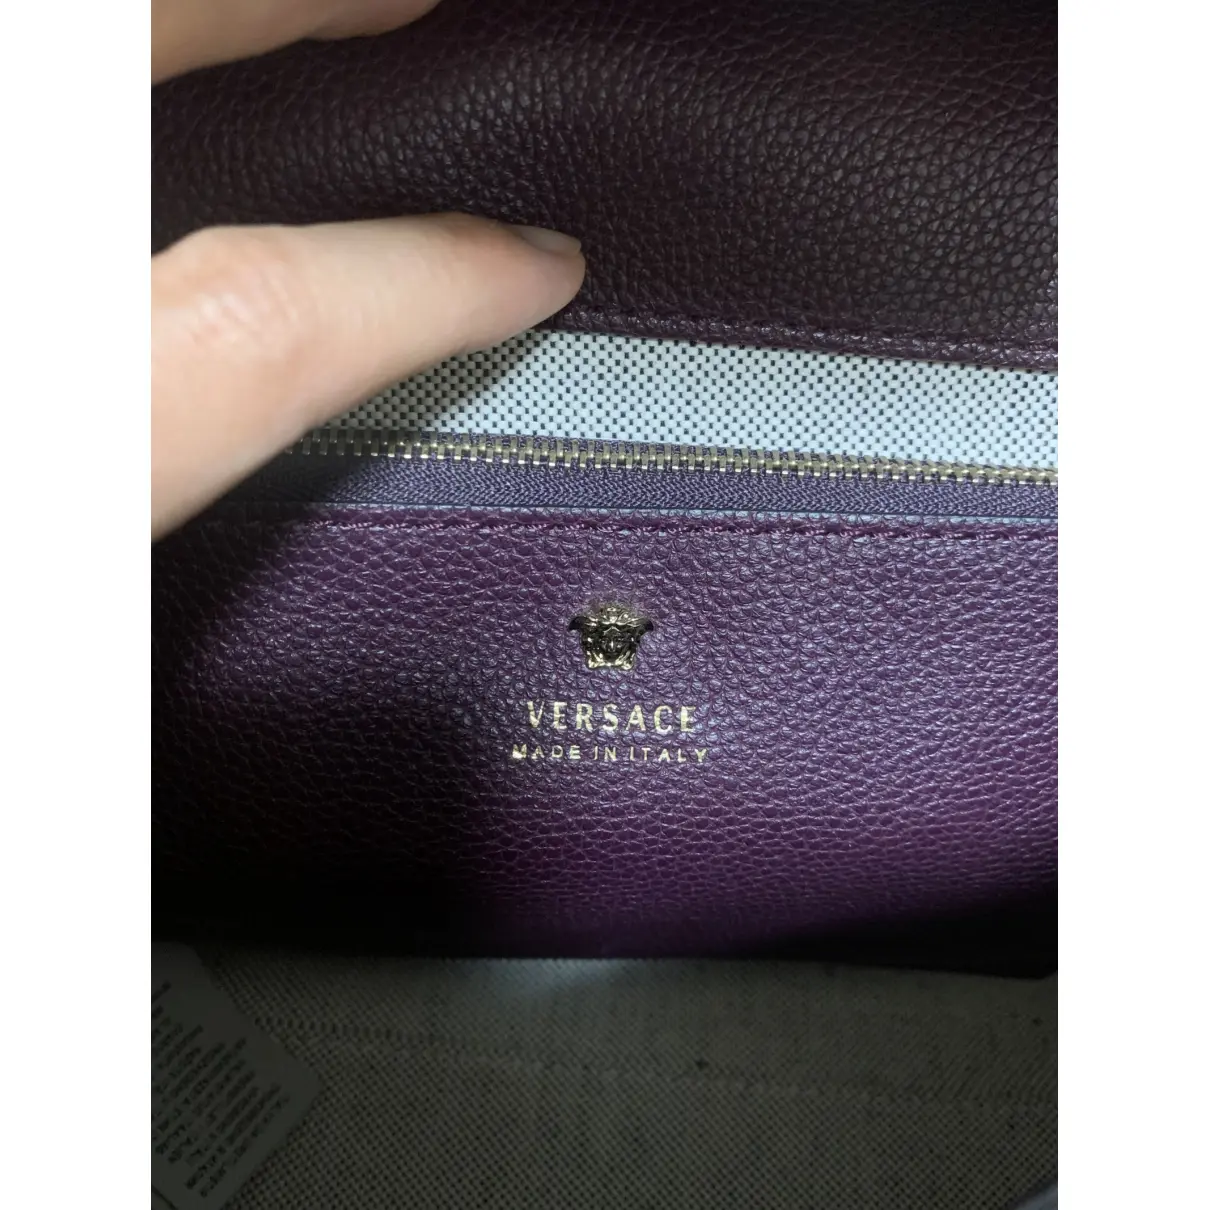 Palazzo Empire leather bag Versace